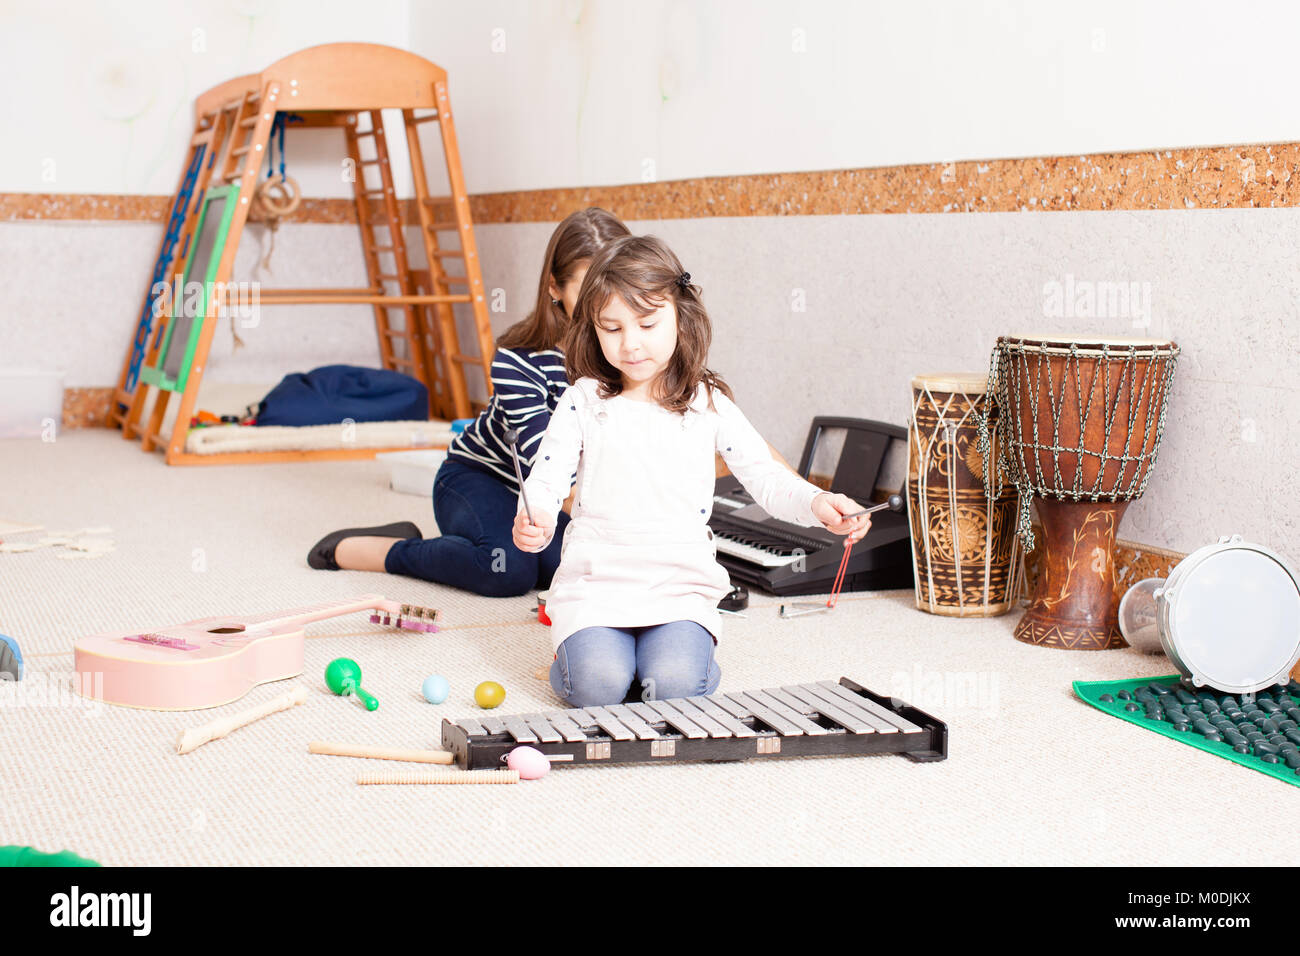 Cute girl playing on the xylophone Stock Photo